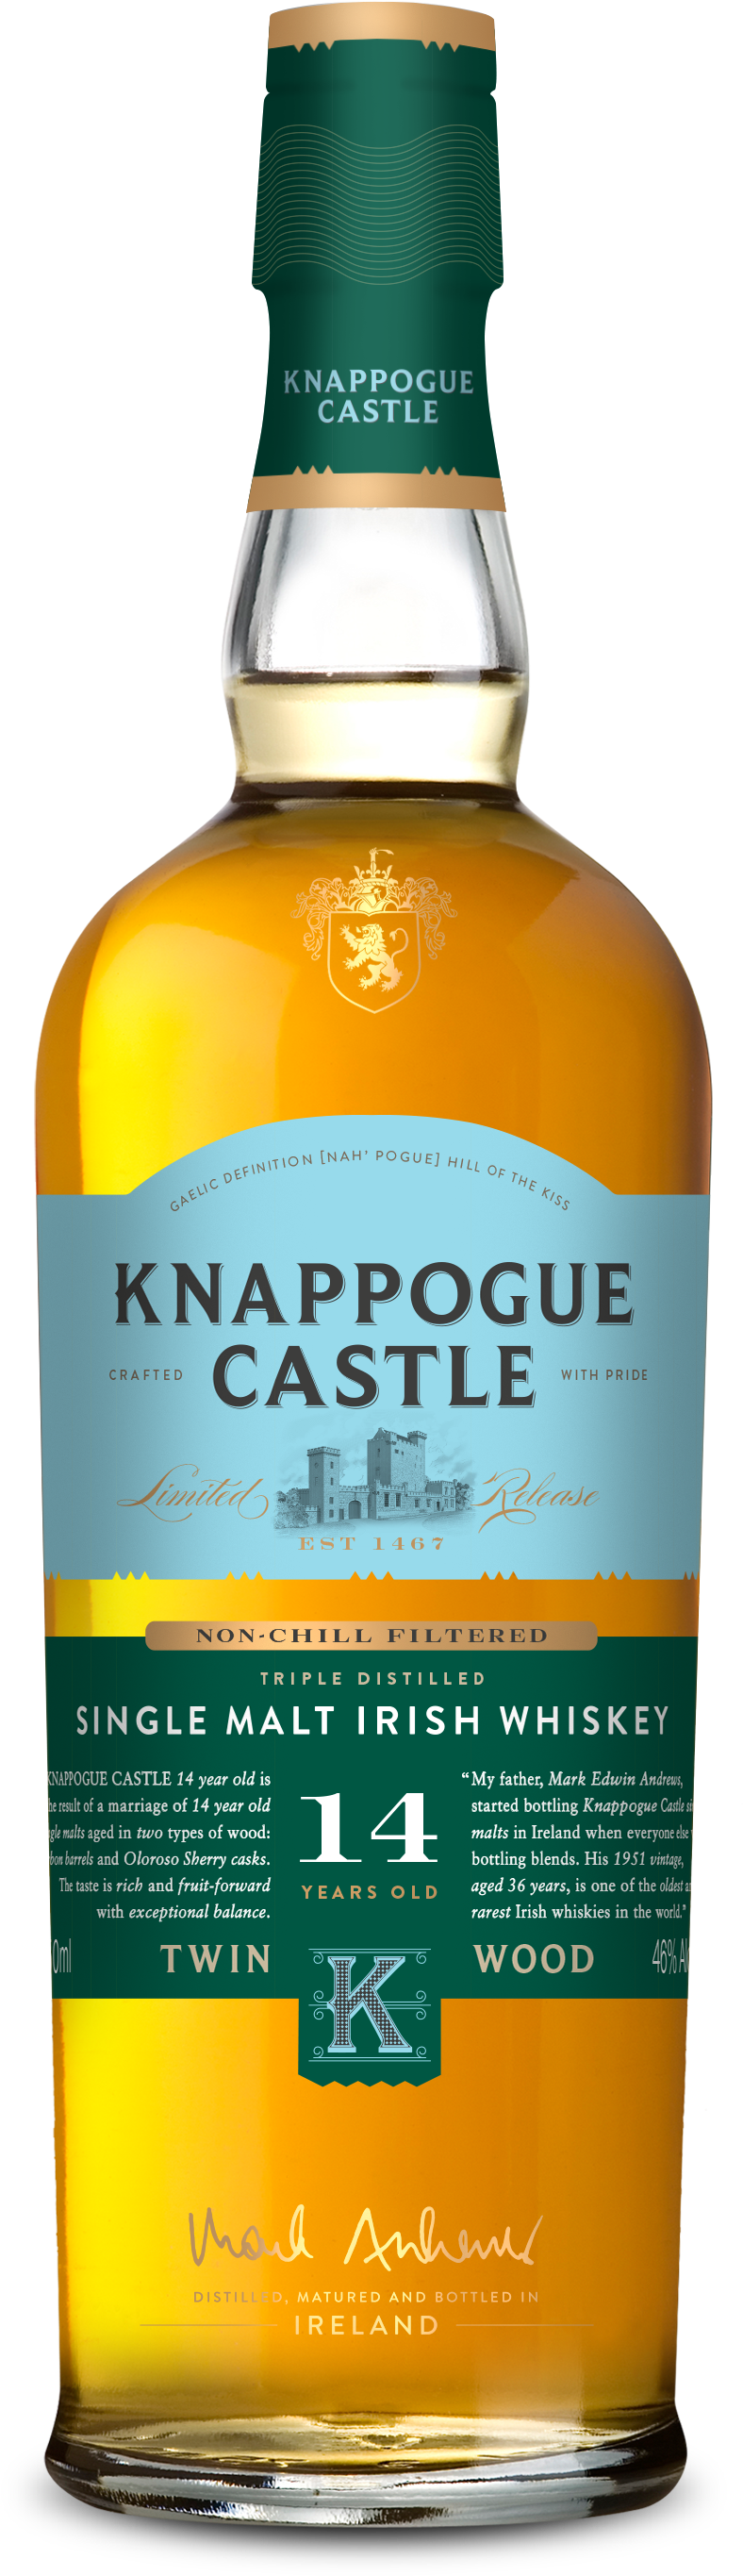 Your Home Is Your Castle - Knappogue Castle Whiskey (1240x2816)